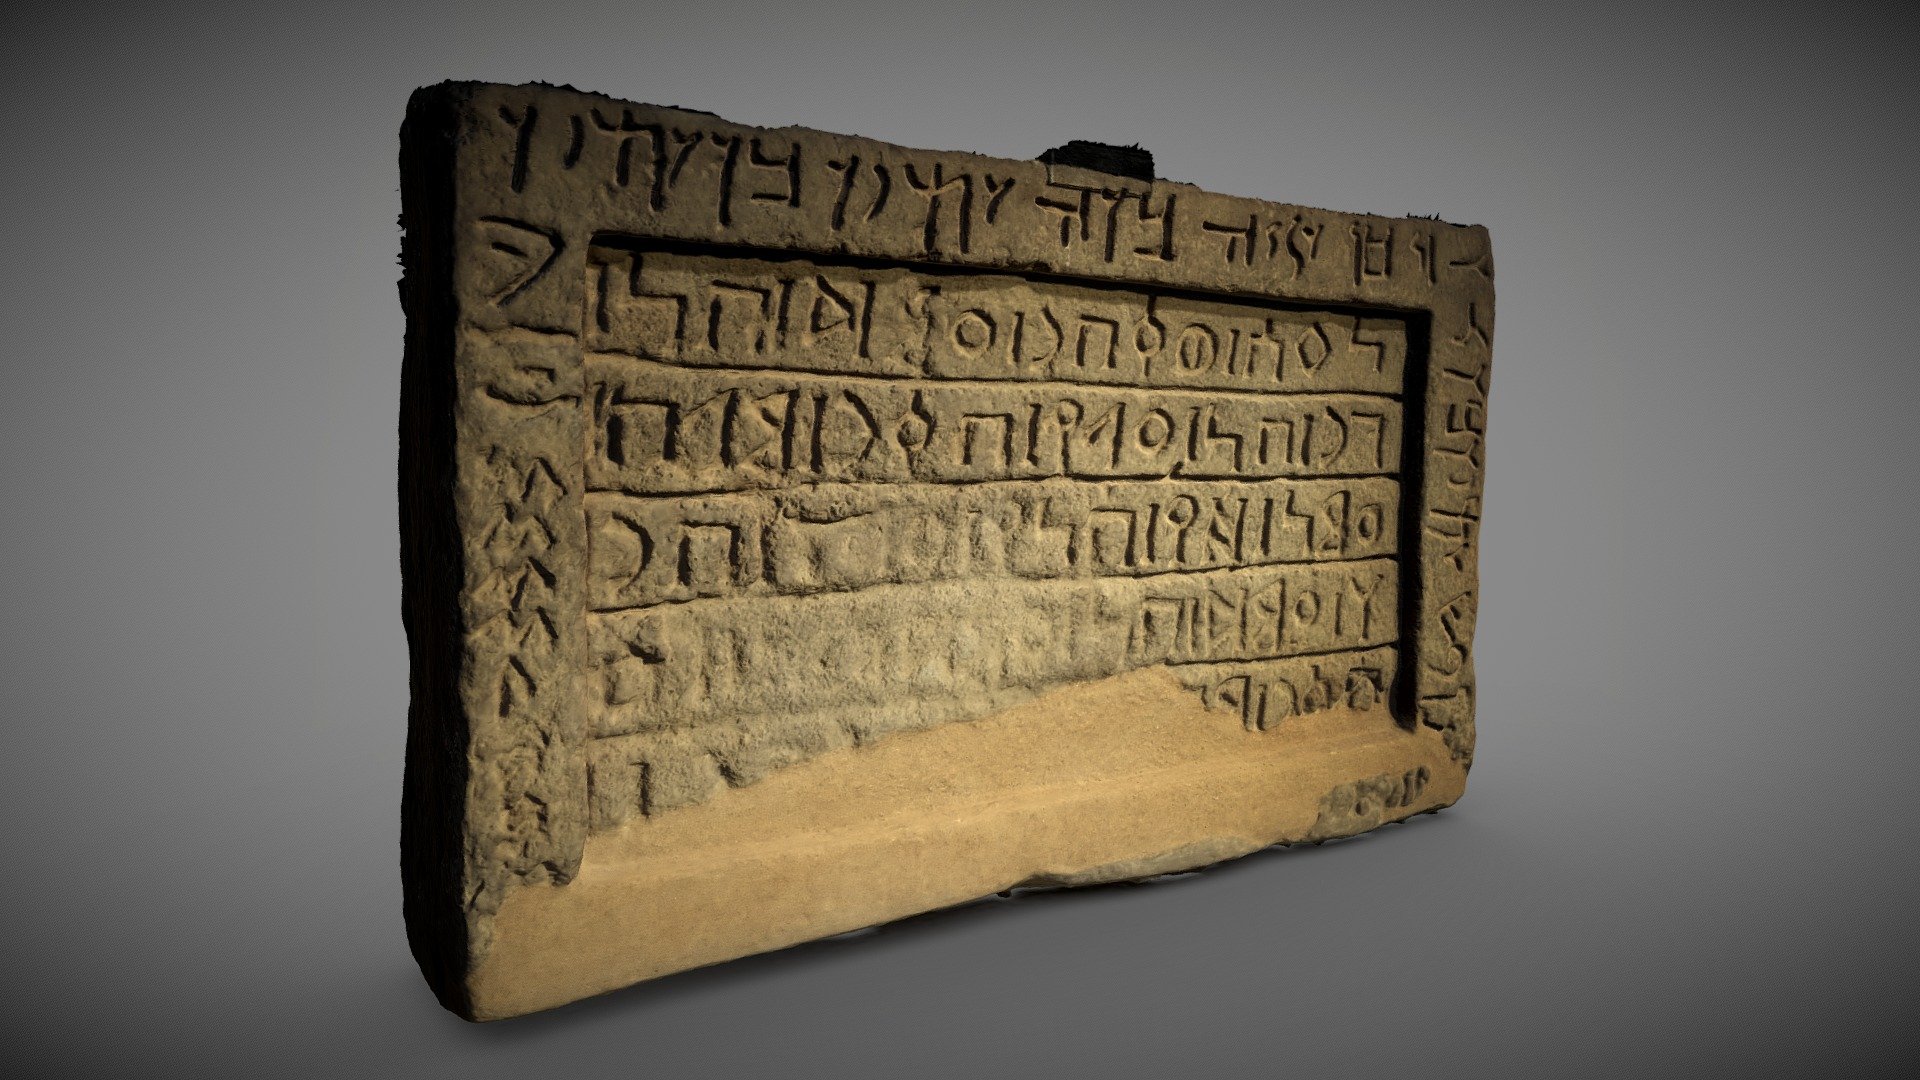 This lime plaster block with a bilingual funerary inscription was discovered in 2015, reused inside an underground tomb chamber. Musée d’Art et d’Histoire (Musée du Cinquantenaire, Brussels, Belgium). Made of 140 pictures with ReCap pro from AutoDesk. 

&ldquo;This is (?) the memorial of ?Amud,son of Gurr, which his son ?Amud,son of ?Amud, built over him year 90 (or 97).